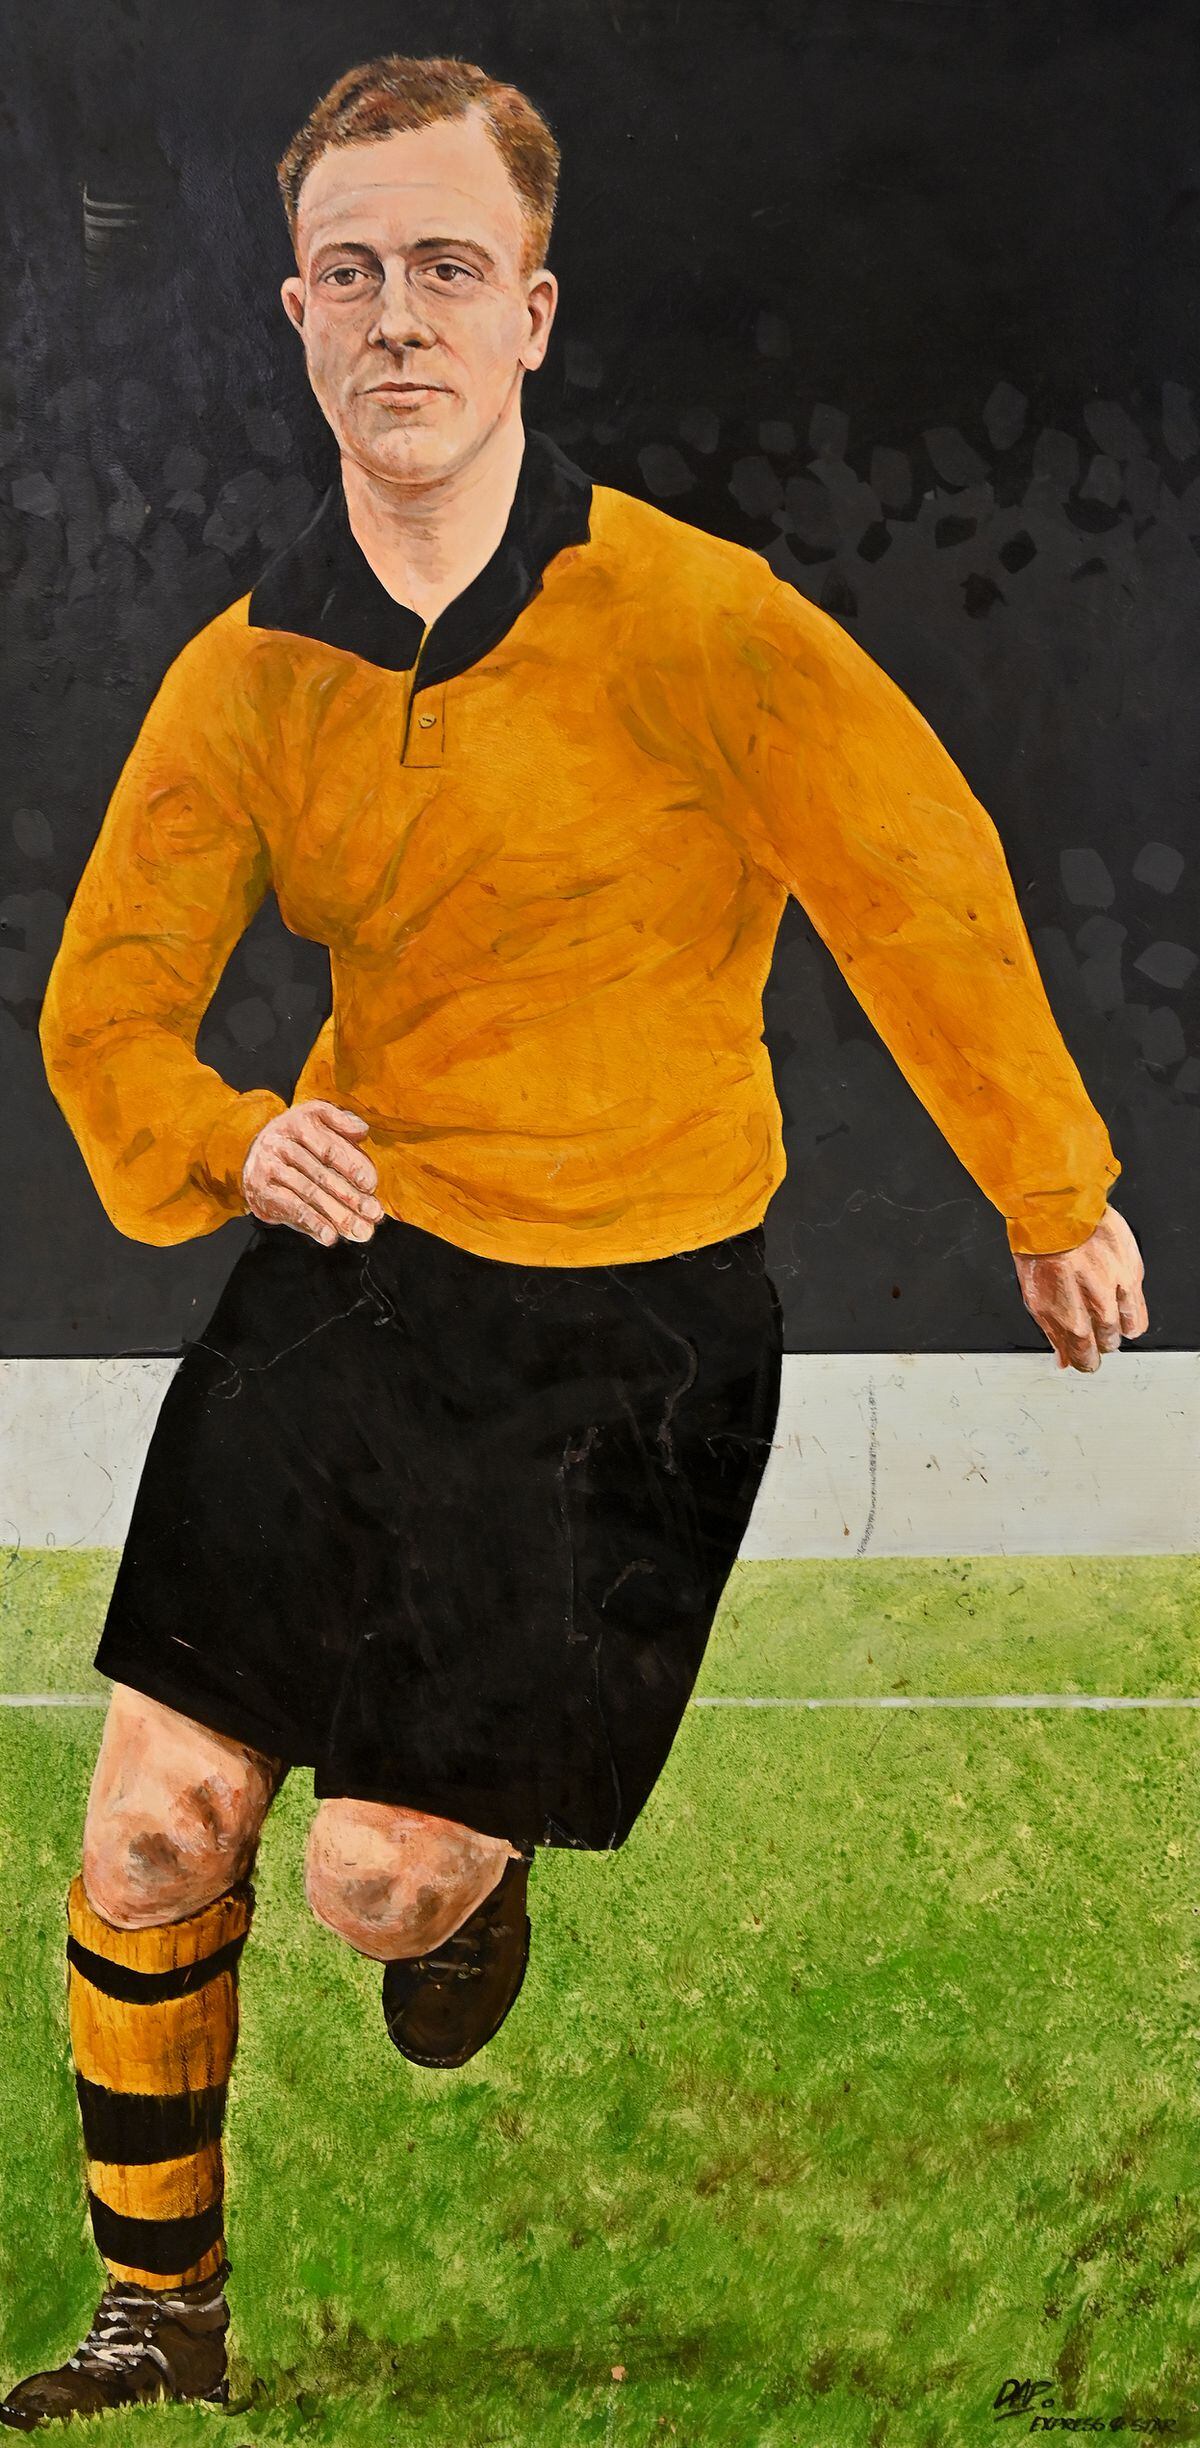 Stan Cullis has success on and off the pitch with Wolves, winning three league championships and two FA Cups as manager